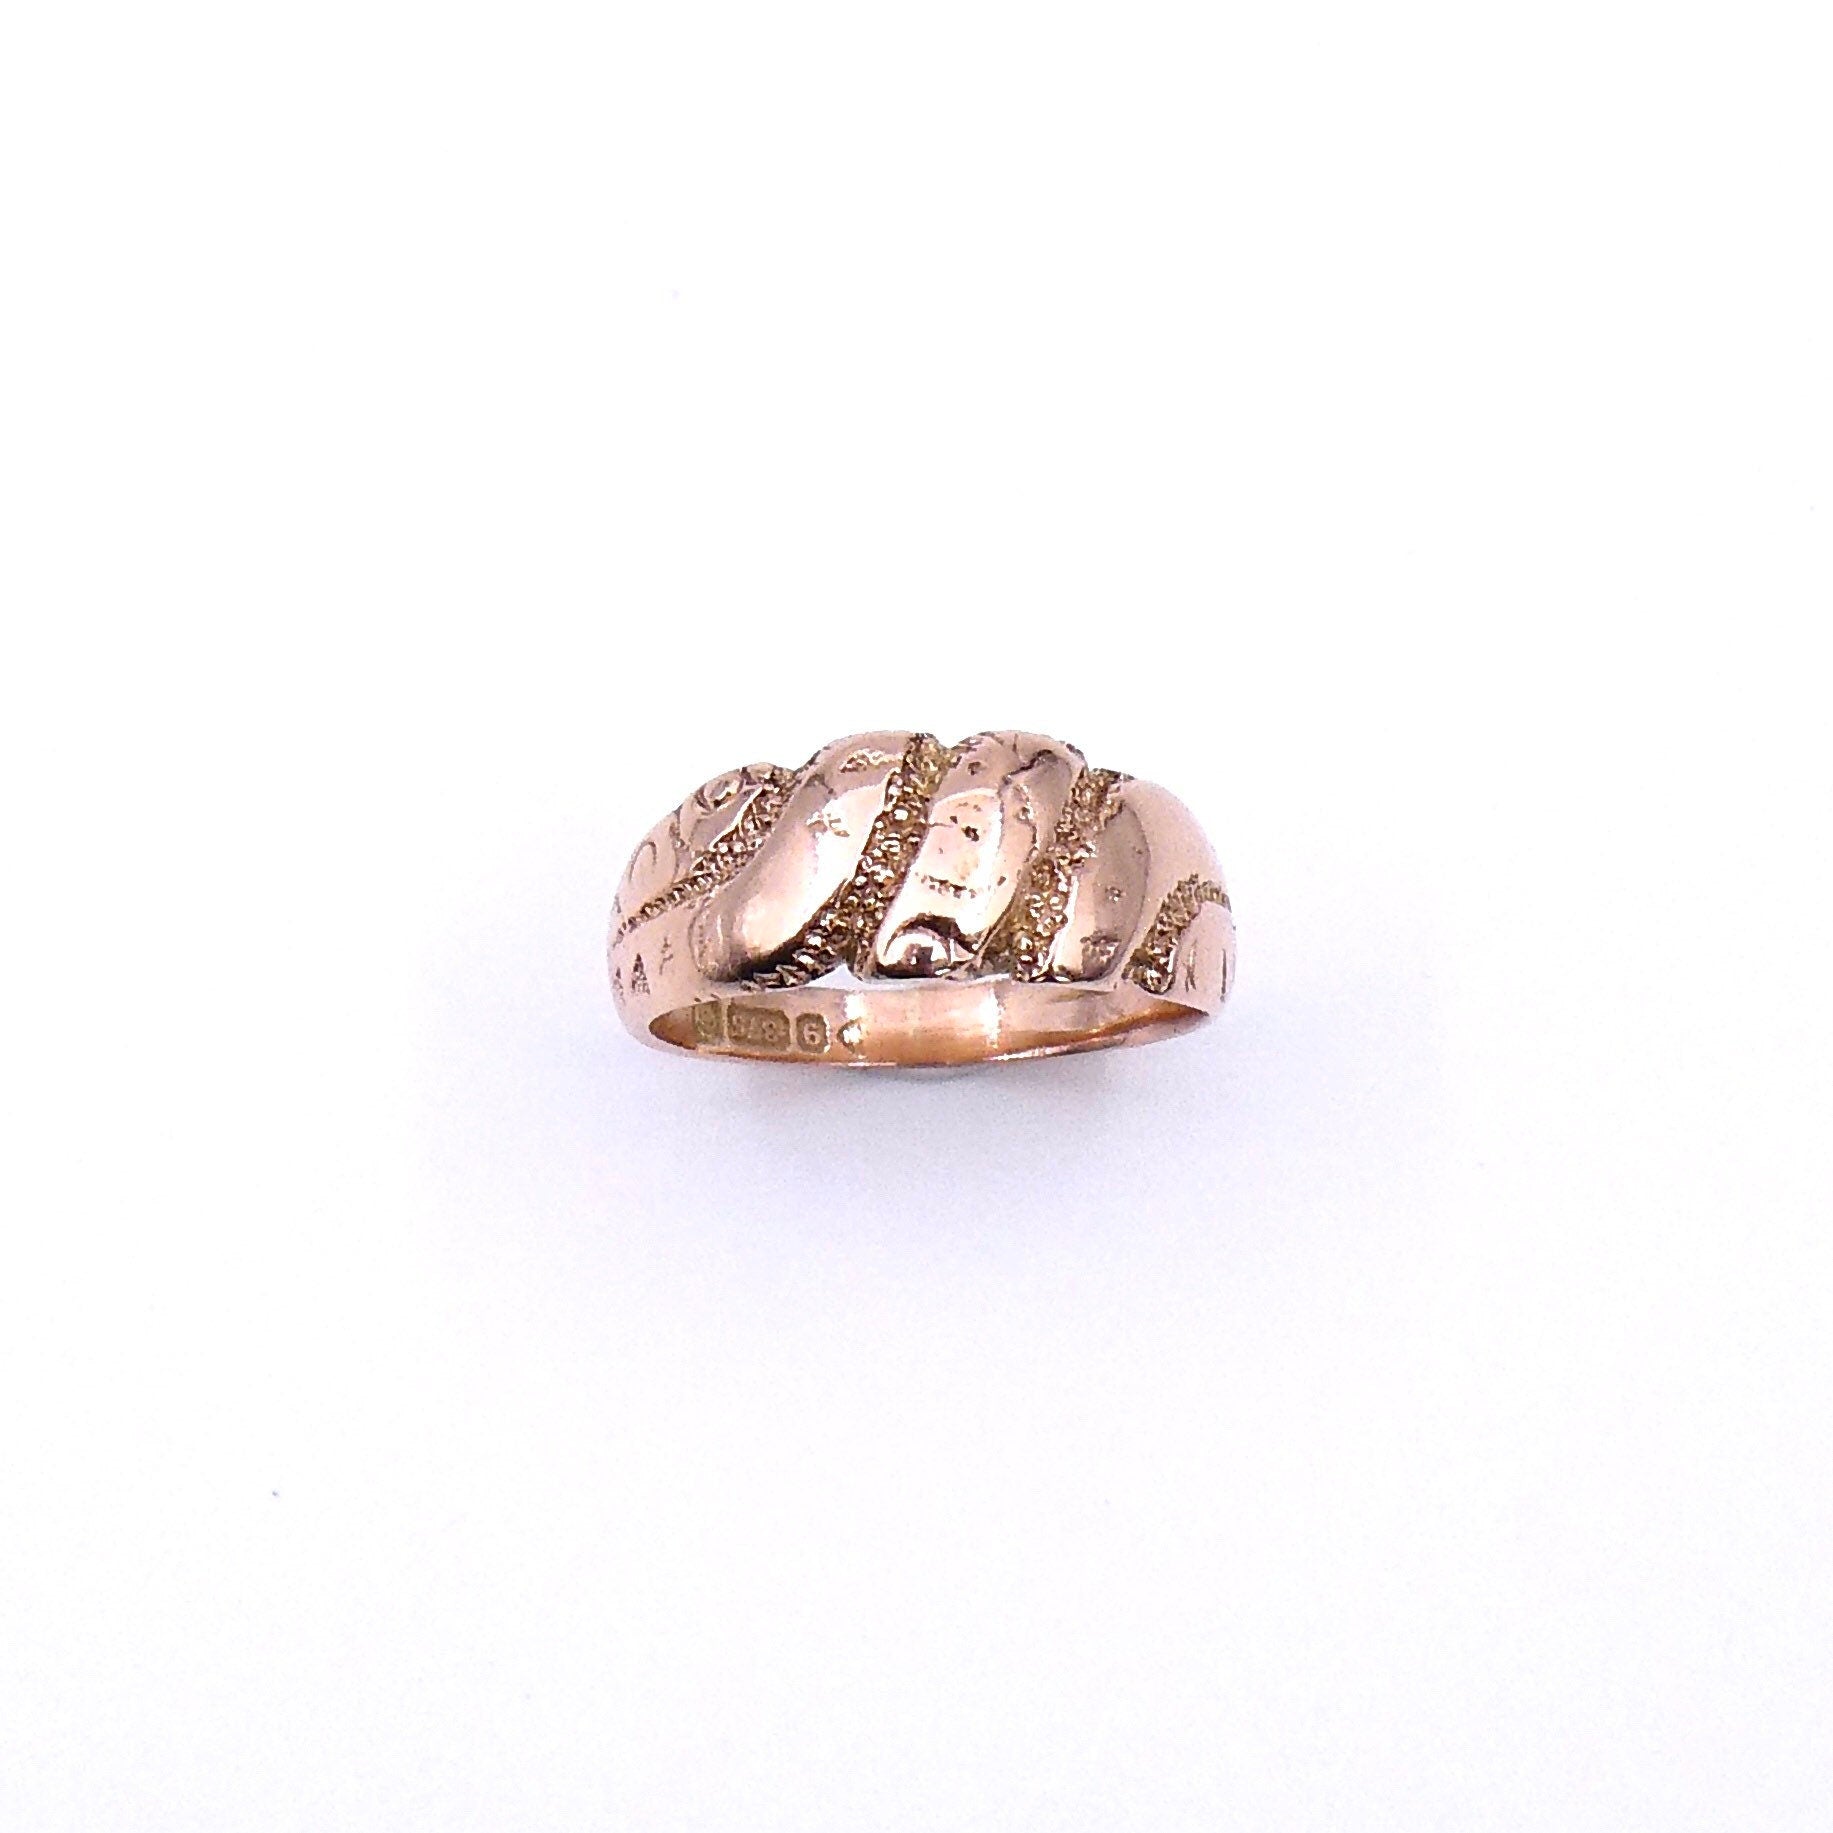 Vintage 9kt engraved rose gold ring with beautiful curved patterning. - Collected